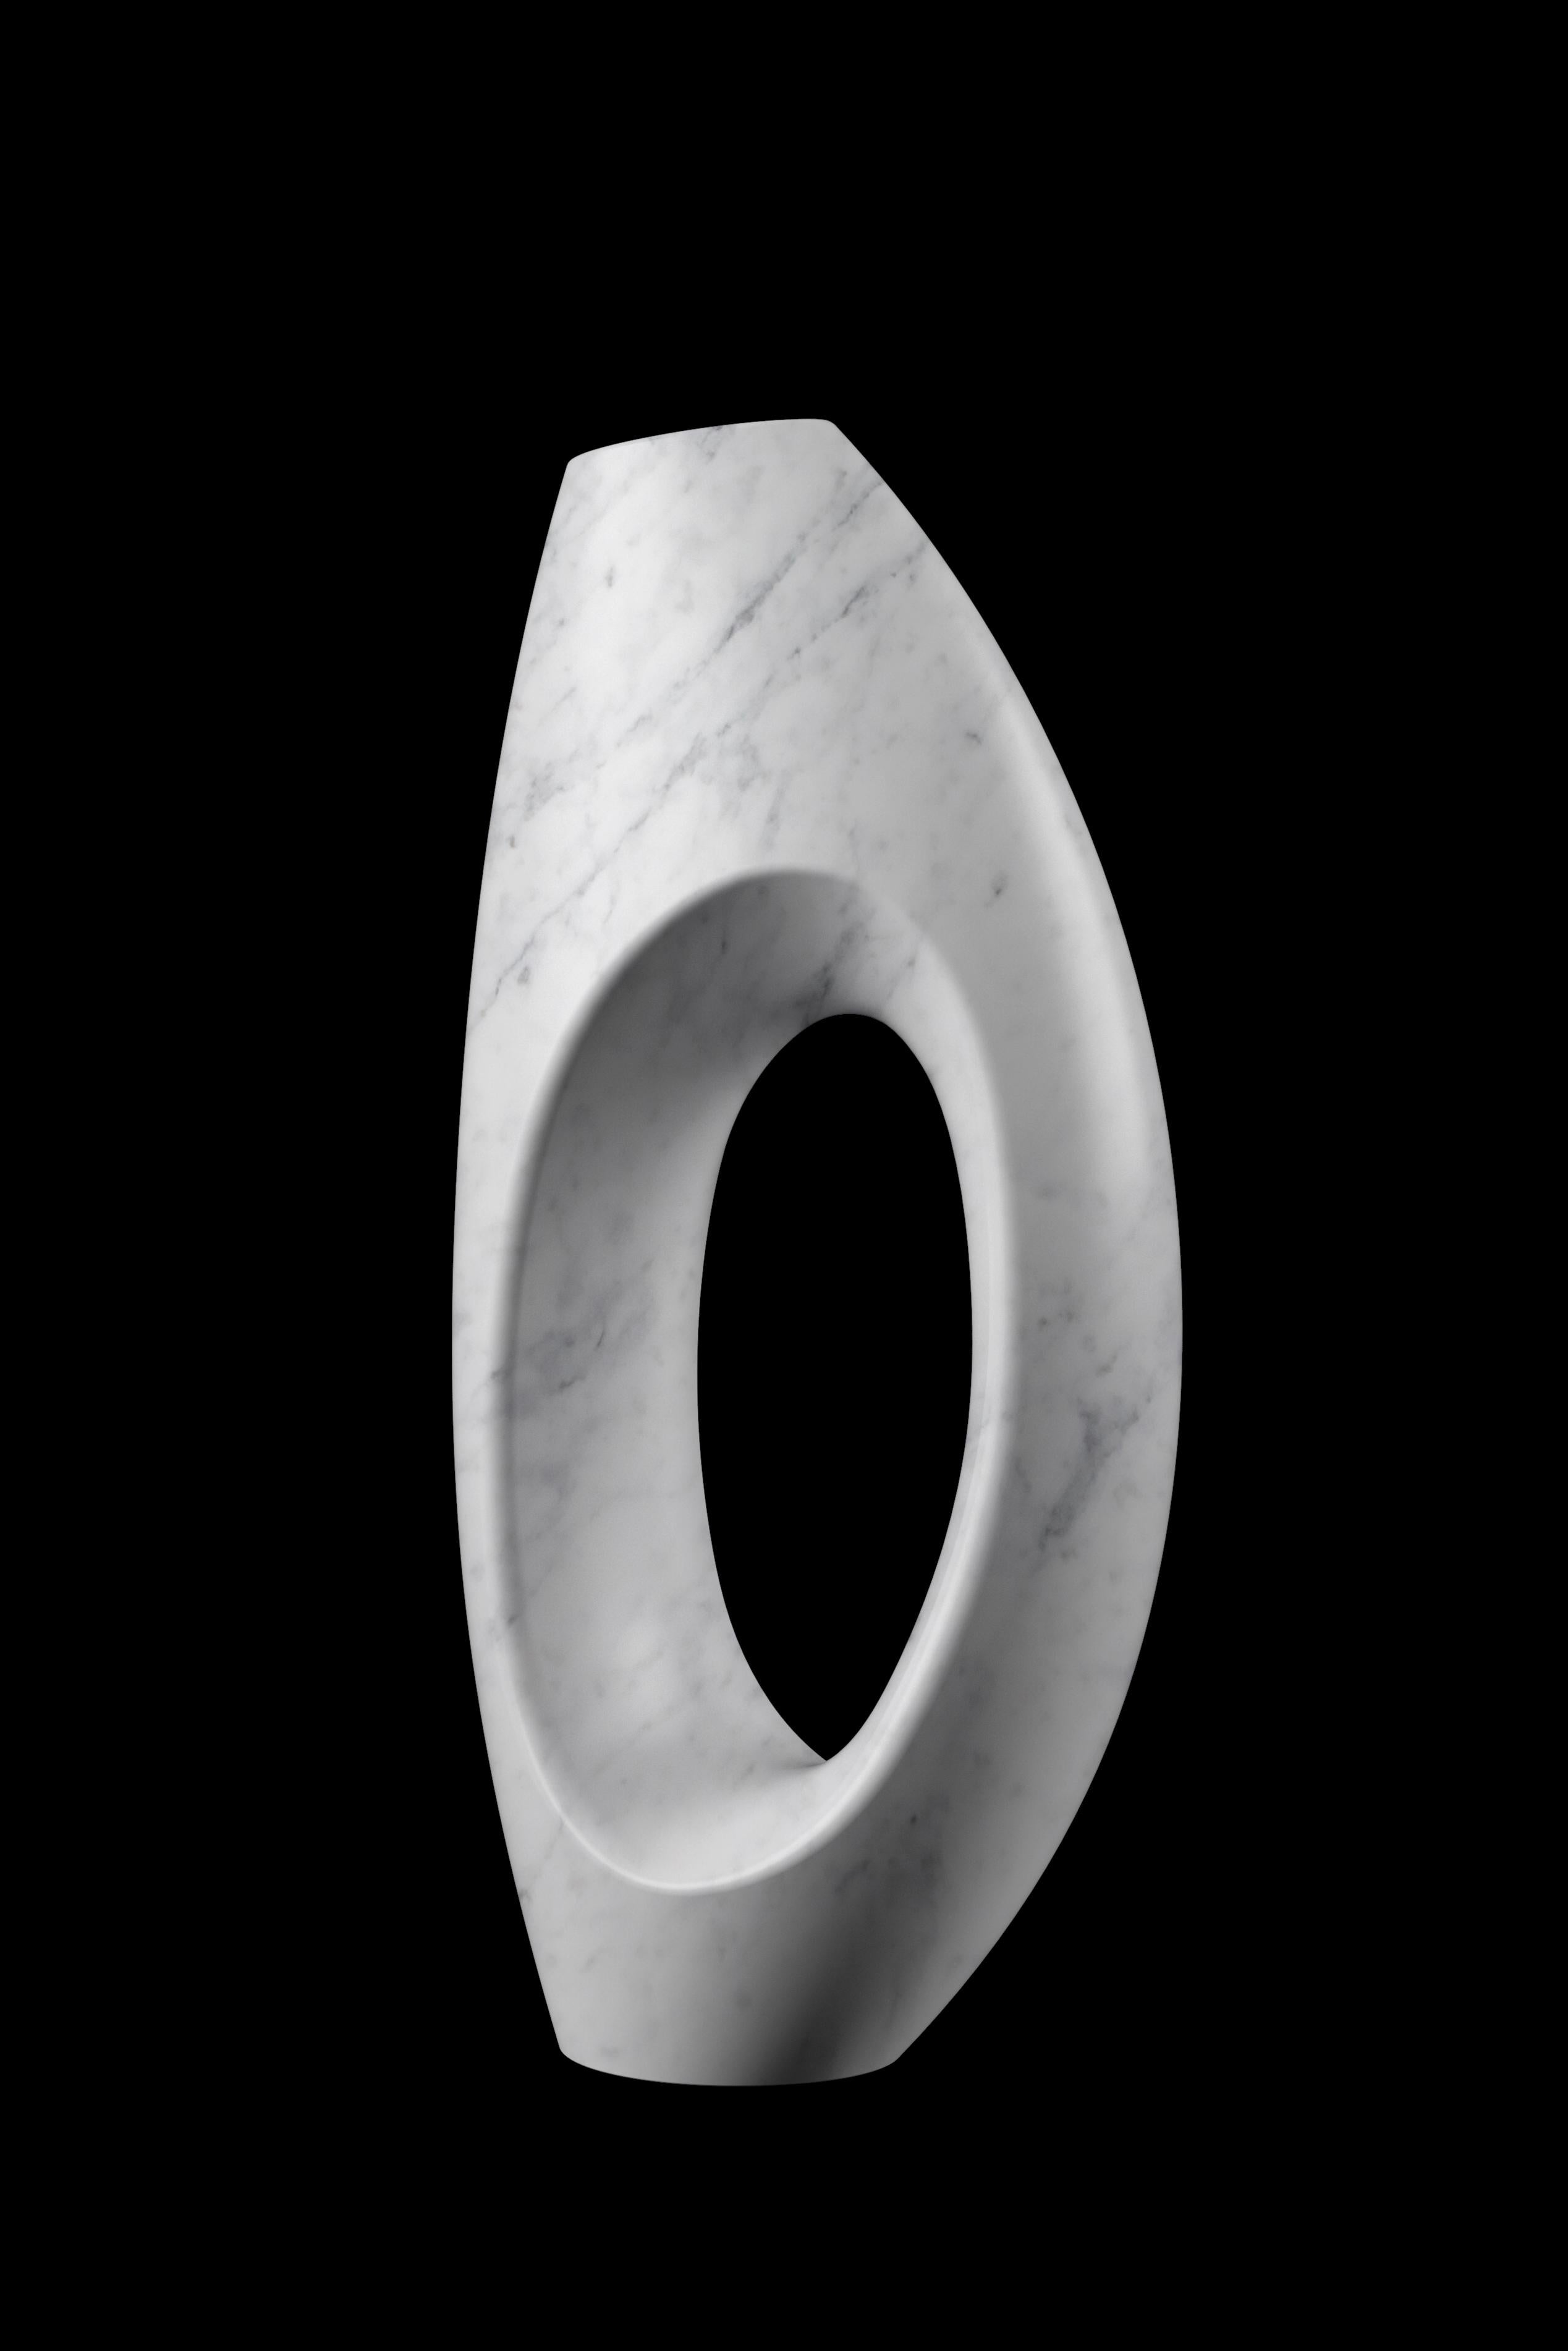 Sculptural vase carved by hand from a solid block of white Carrara marble, velvet finish. This vase reproduces, in a smaller version, the iconic sculptural vase PV02 designed by the Atelier Barberini & Gunnell, hand made in a limited edition for the